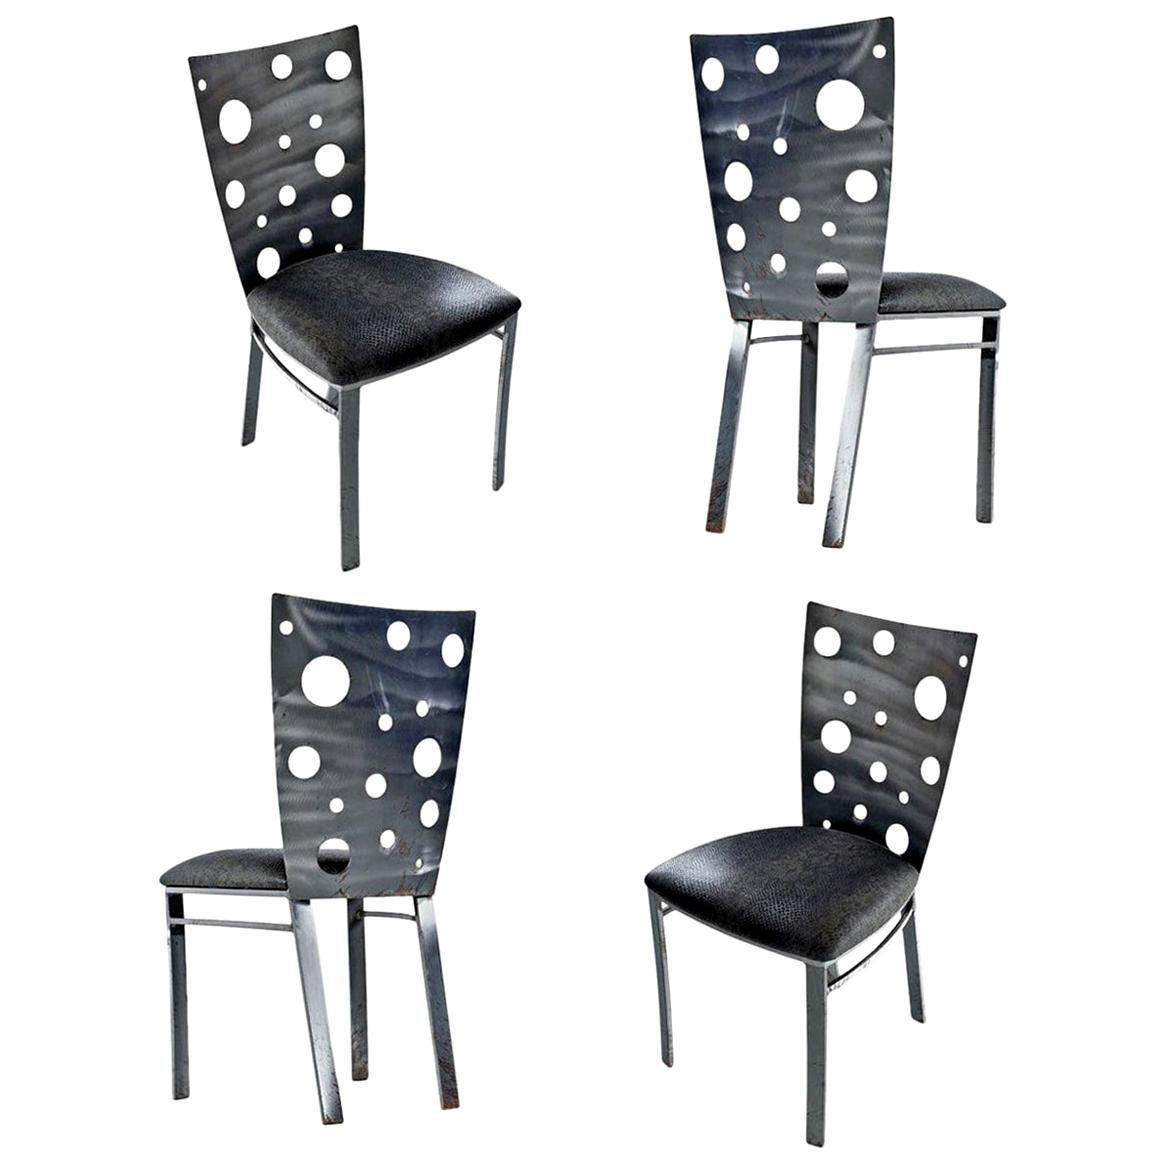 Snake Skin Vinyl Brutalist Style Dining Chairs by Johnston Casuals Furniture